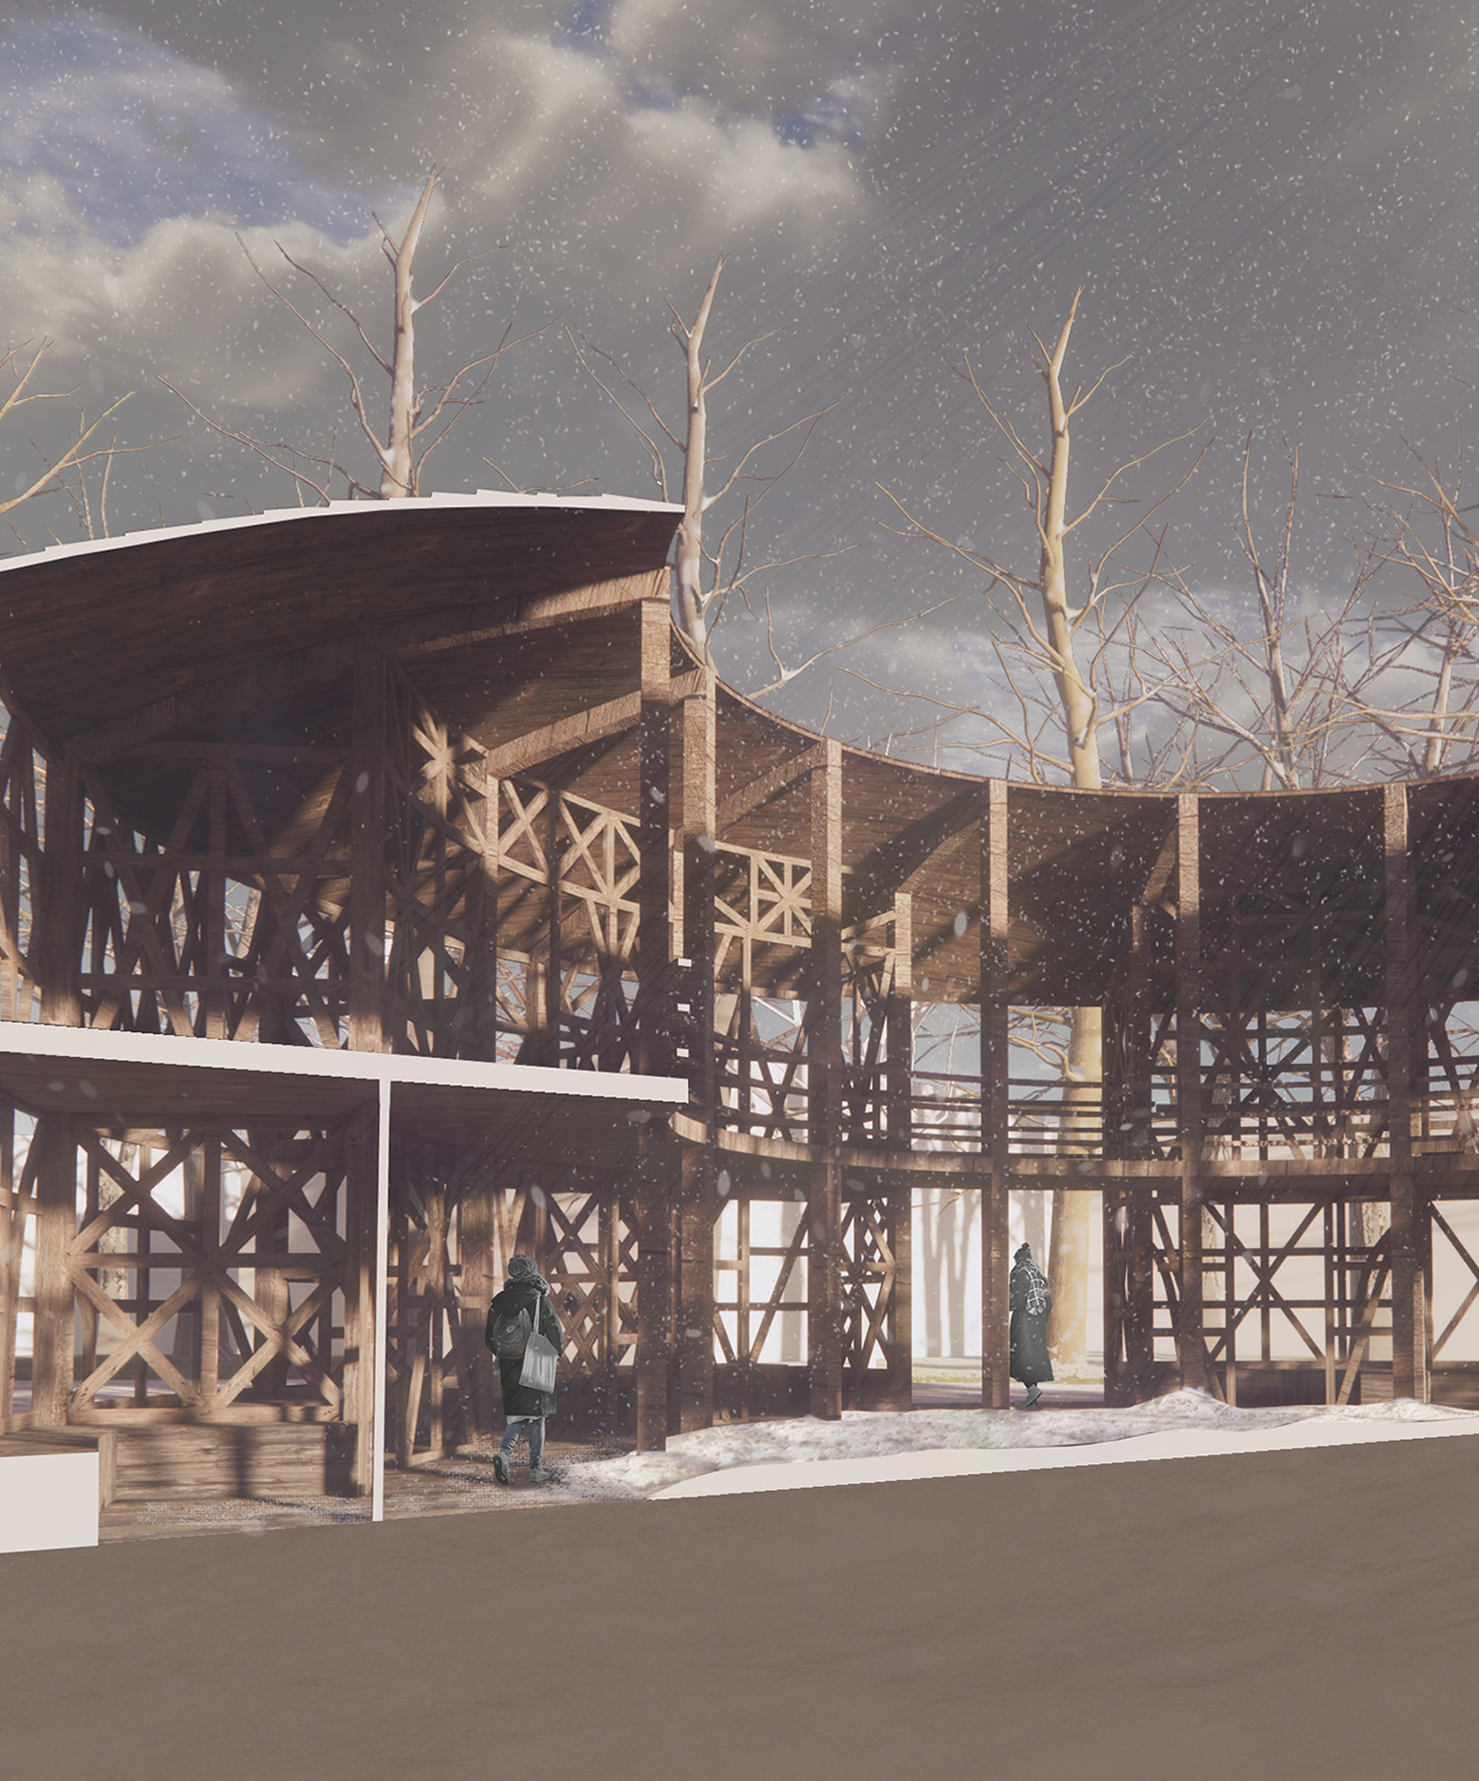 Render of interior of pavilion during the winter.